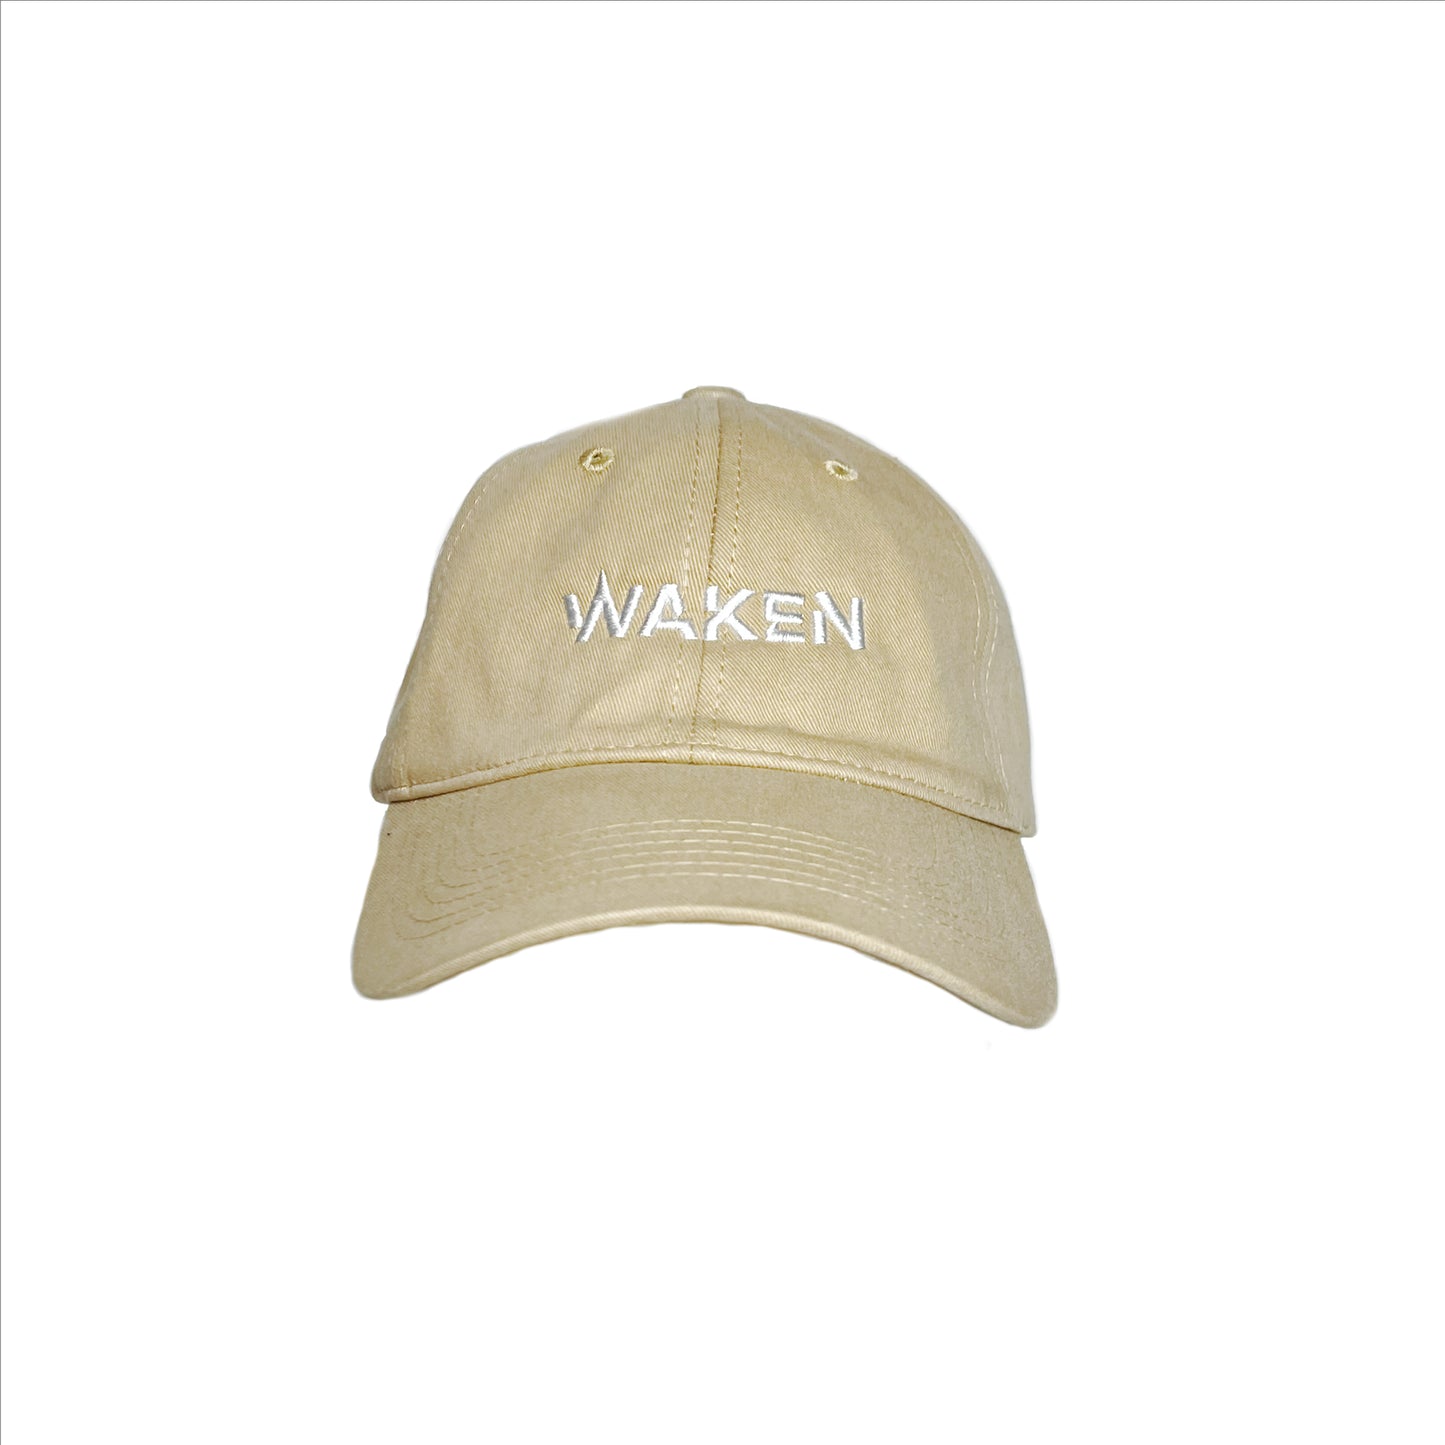 Waken Dad Hat (PRE-ORDER ONLY & ALL SALES ARE FINAL)